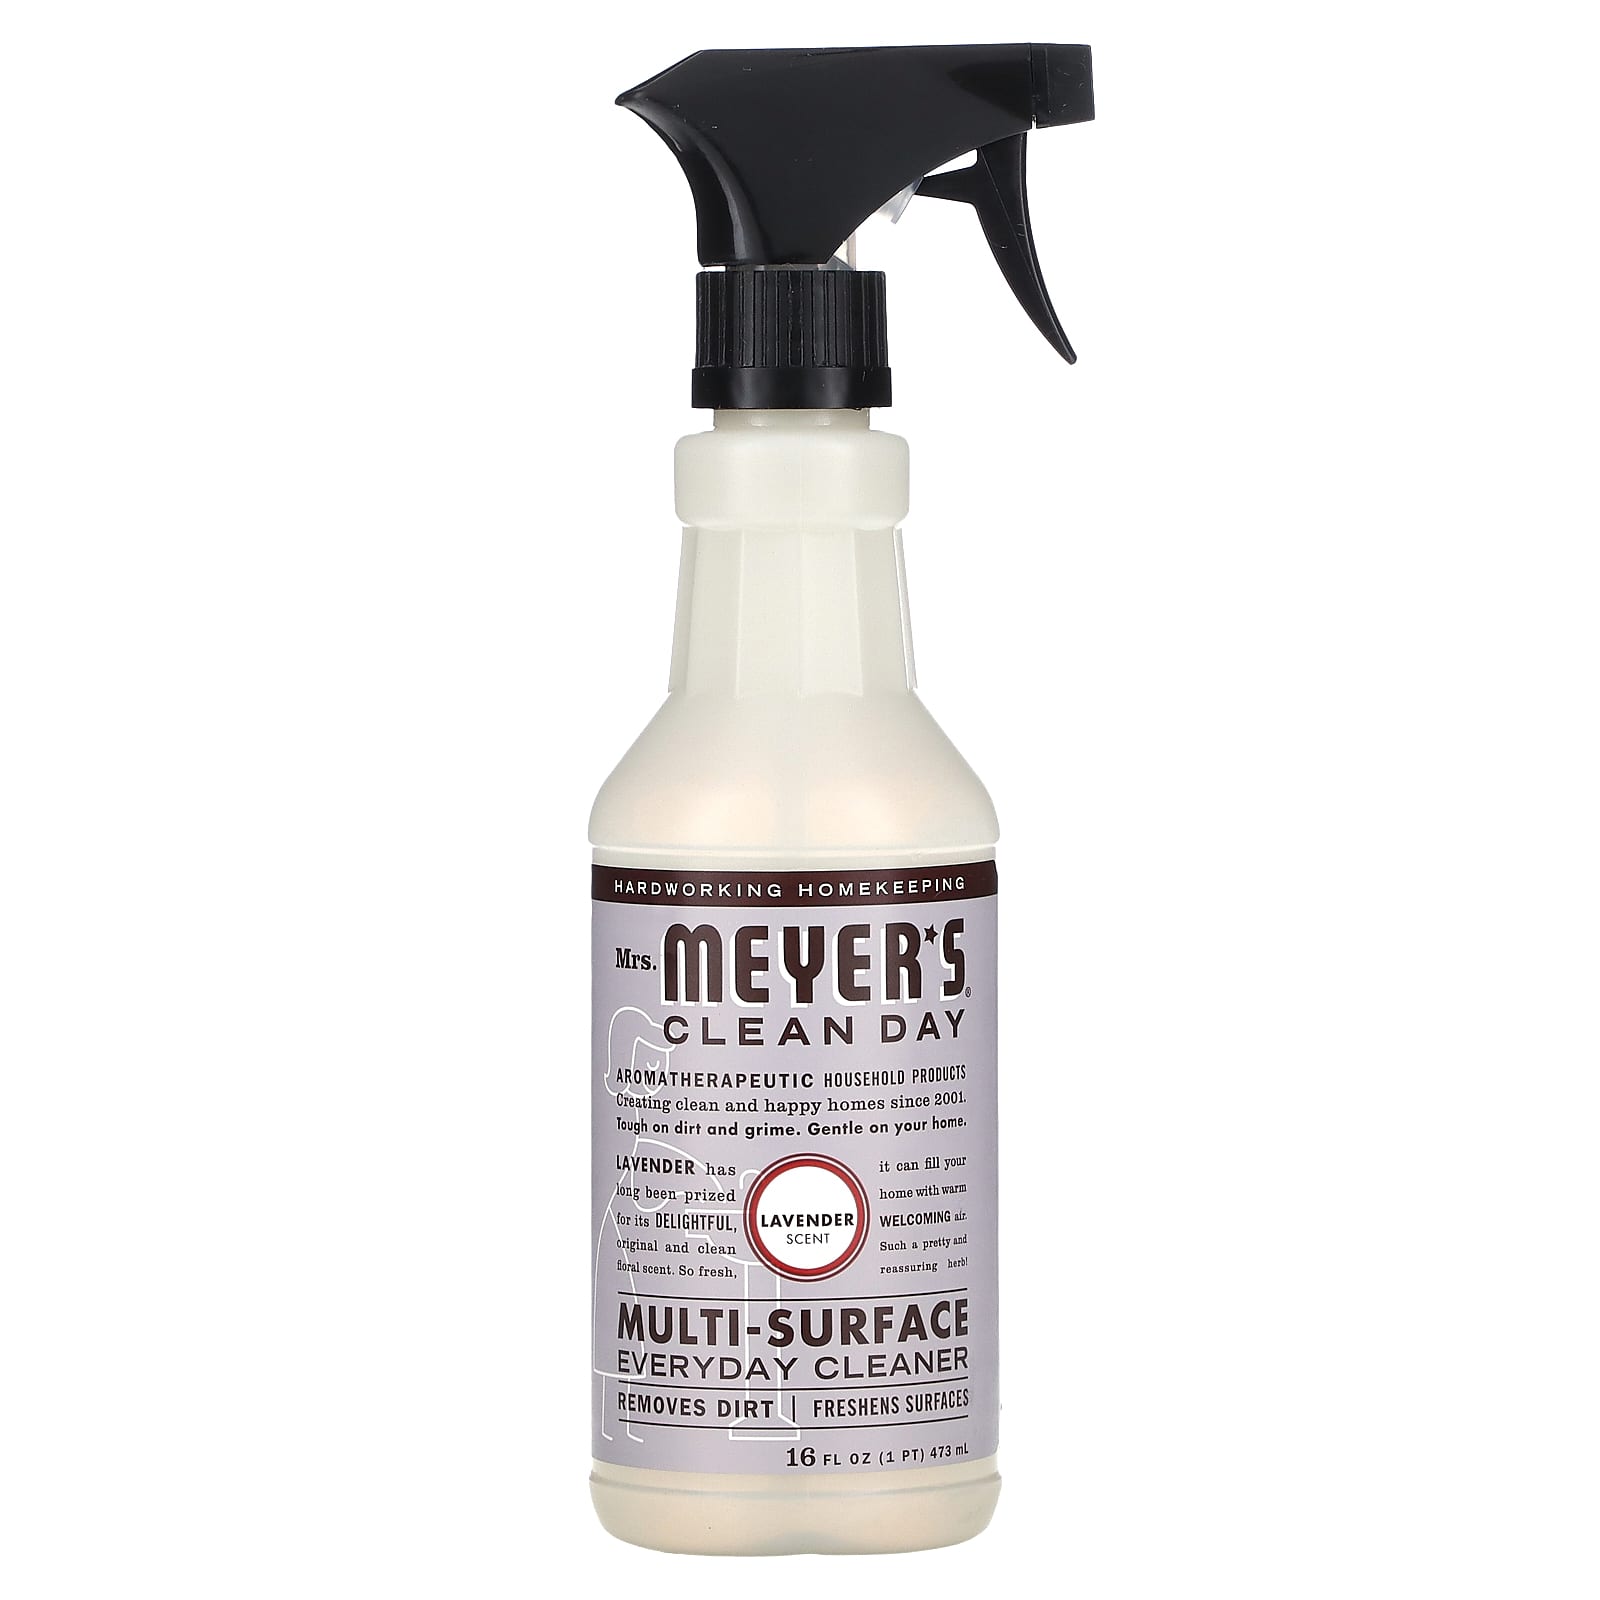 Mrs. Meyers Clean Day-Multi-Surface Everyday Cleaner-Lavender Scent-16 fl oz (473 ml)